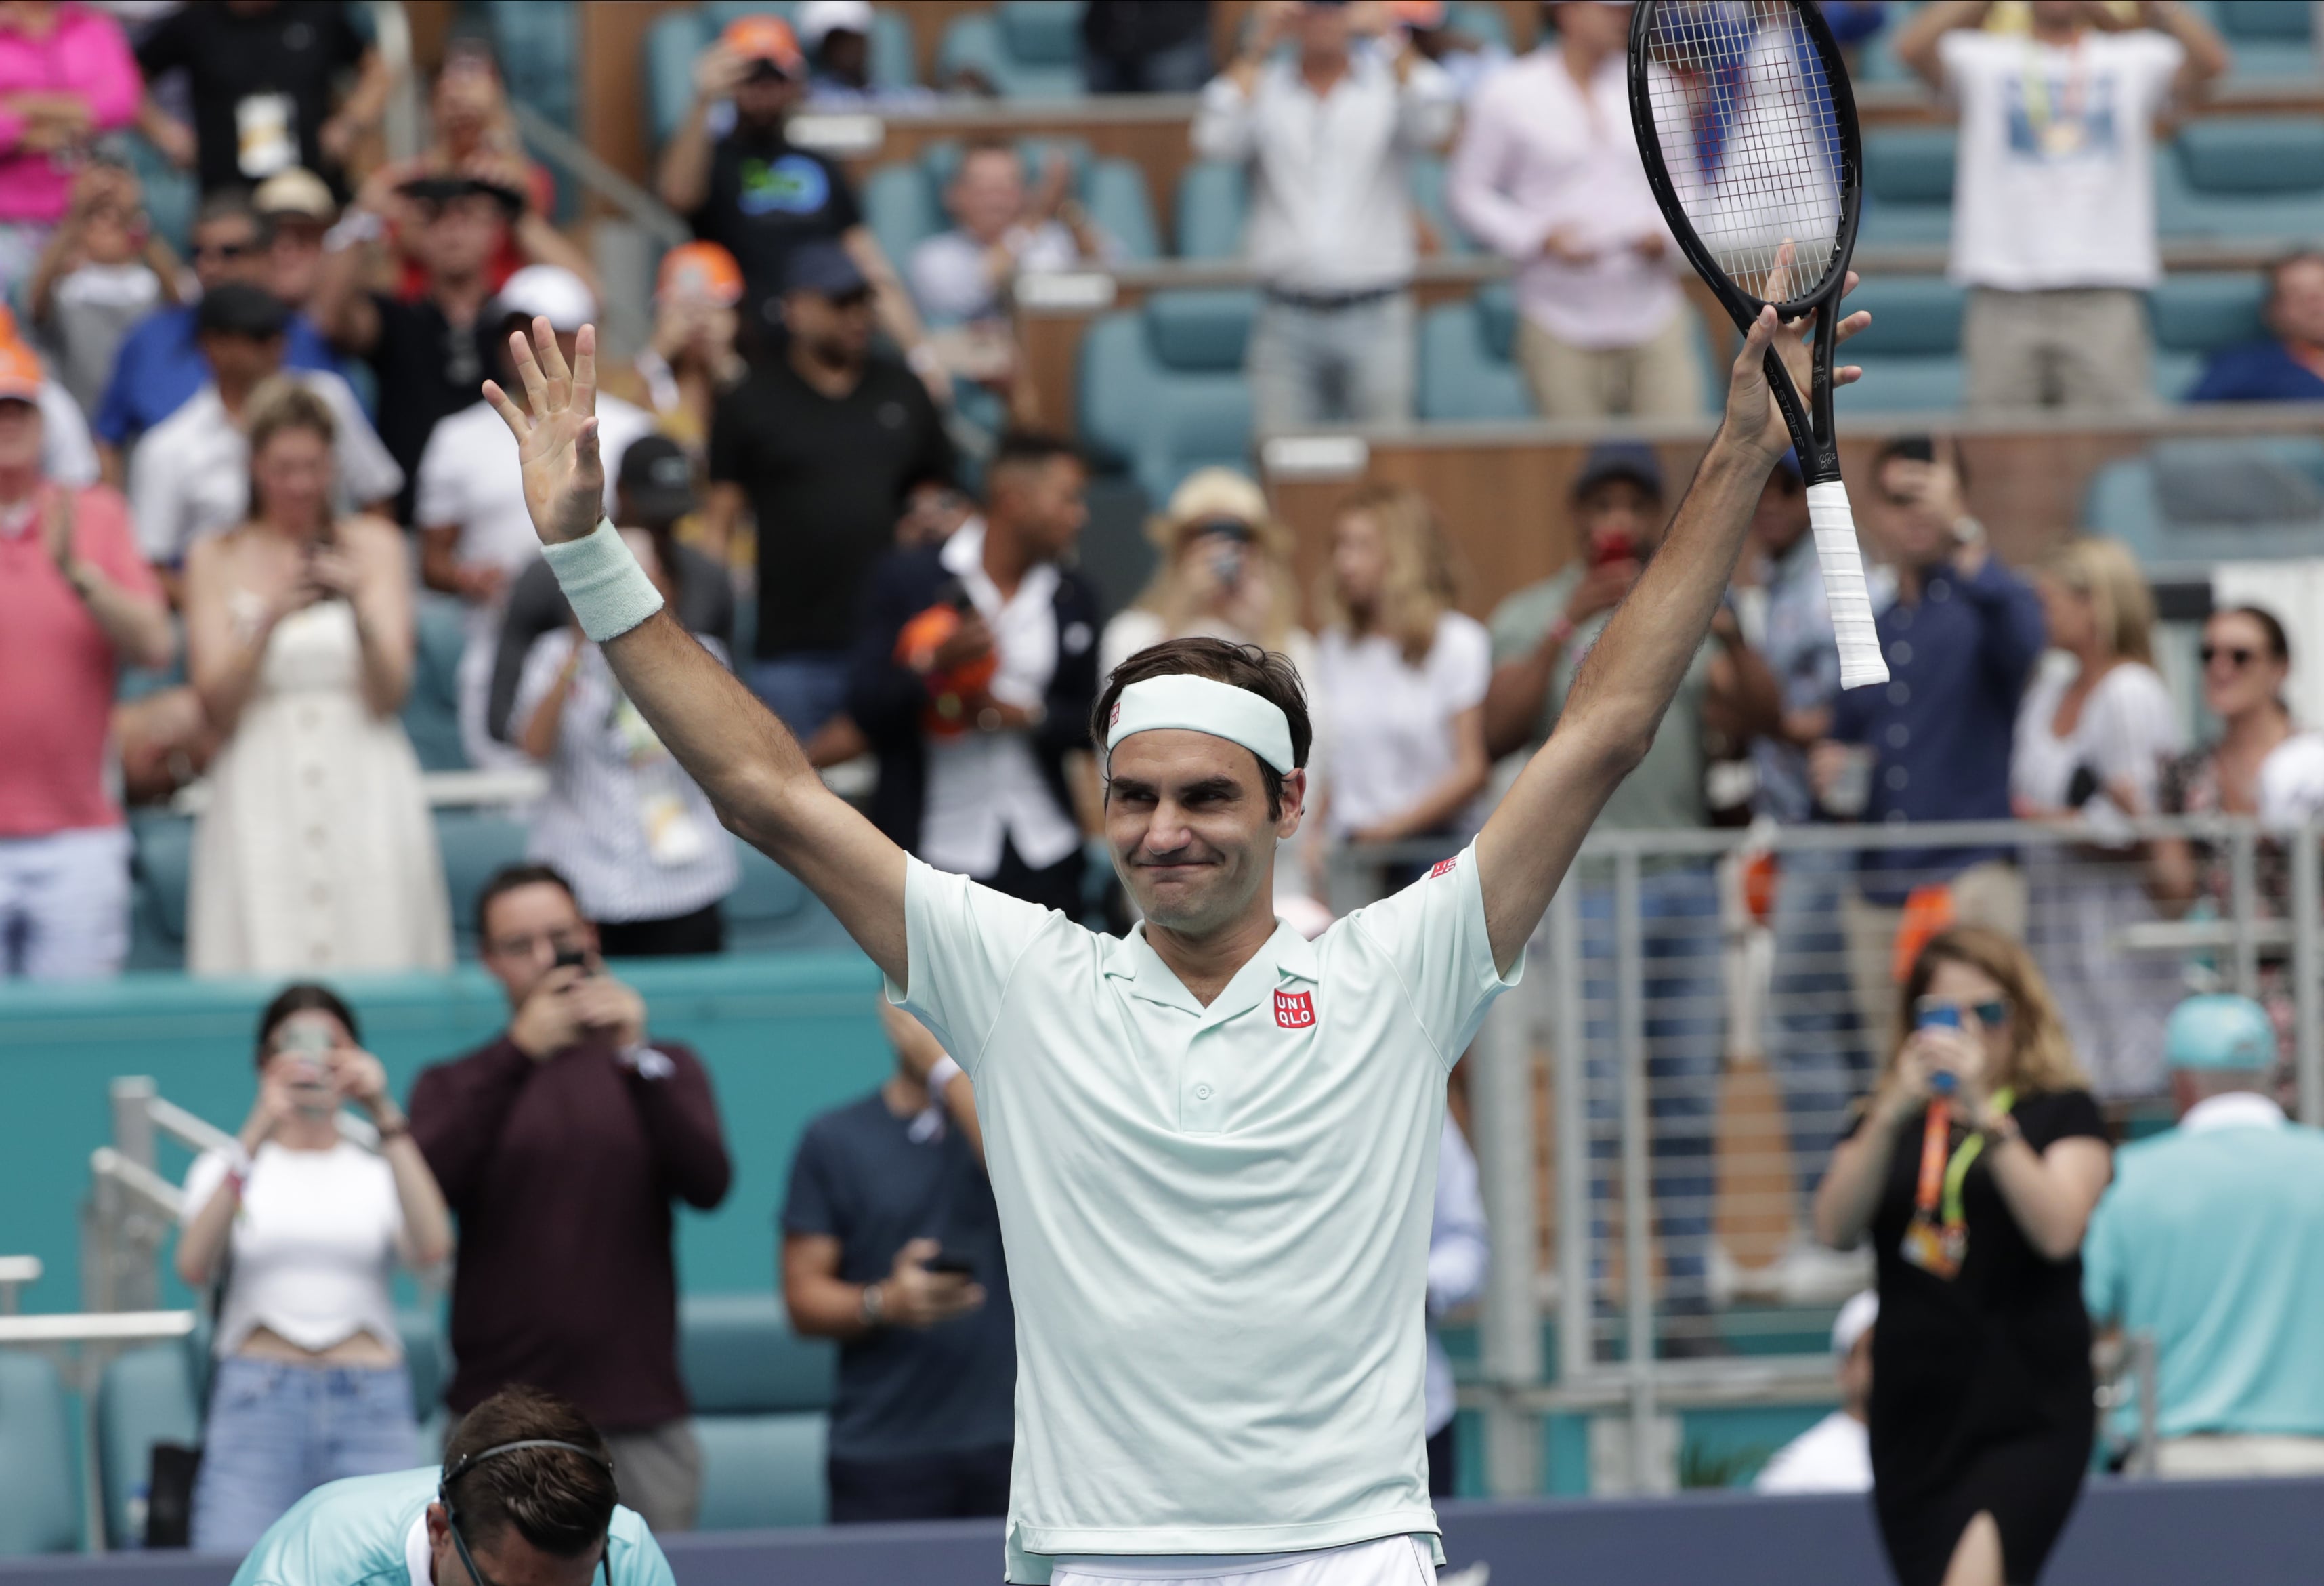 Roger Federer, of Switzerland, reacts after defeating John Isner in the singles final of the Miami Open tennis tournament, Sunday, March 31, 2019, in Miami Gardens, Fla.